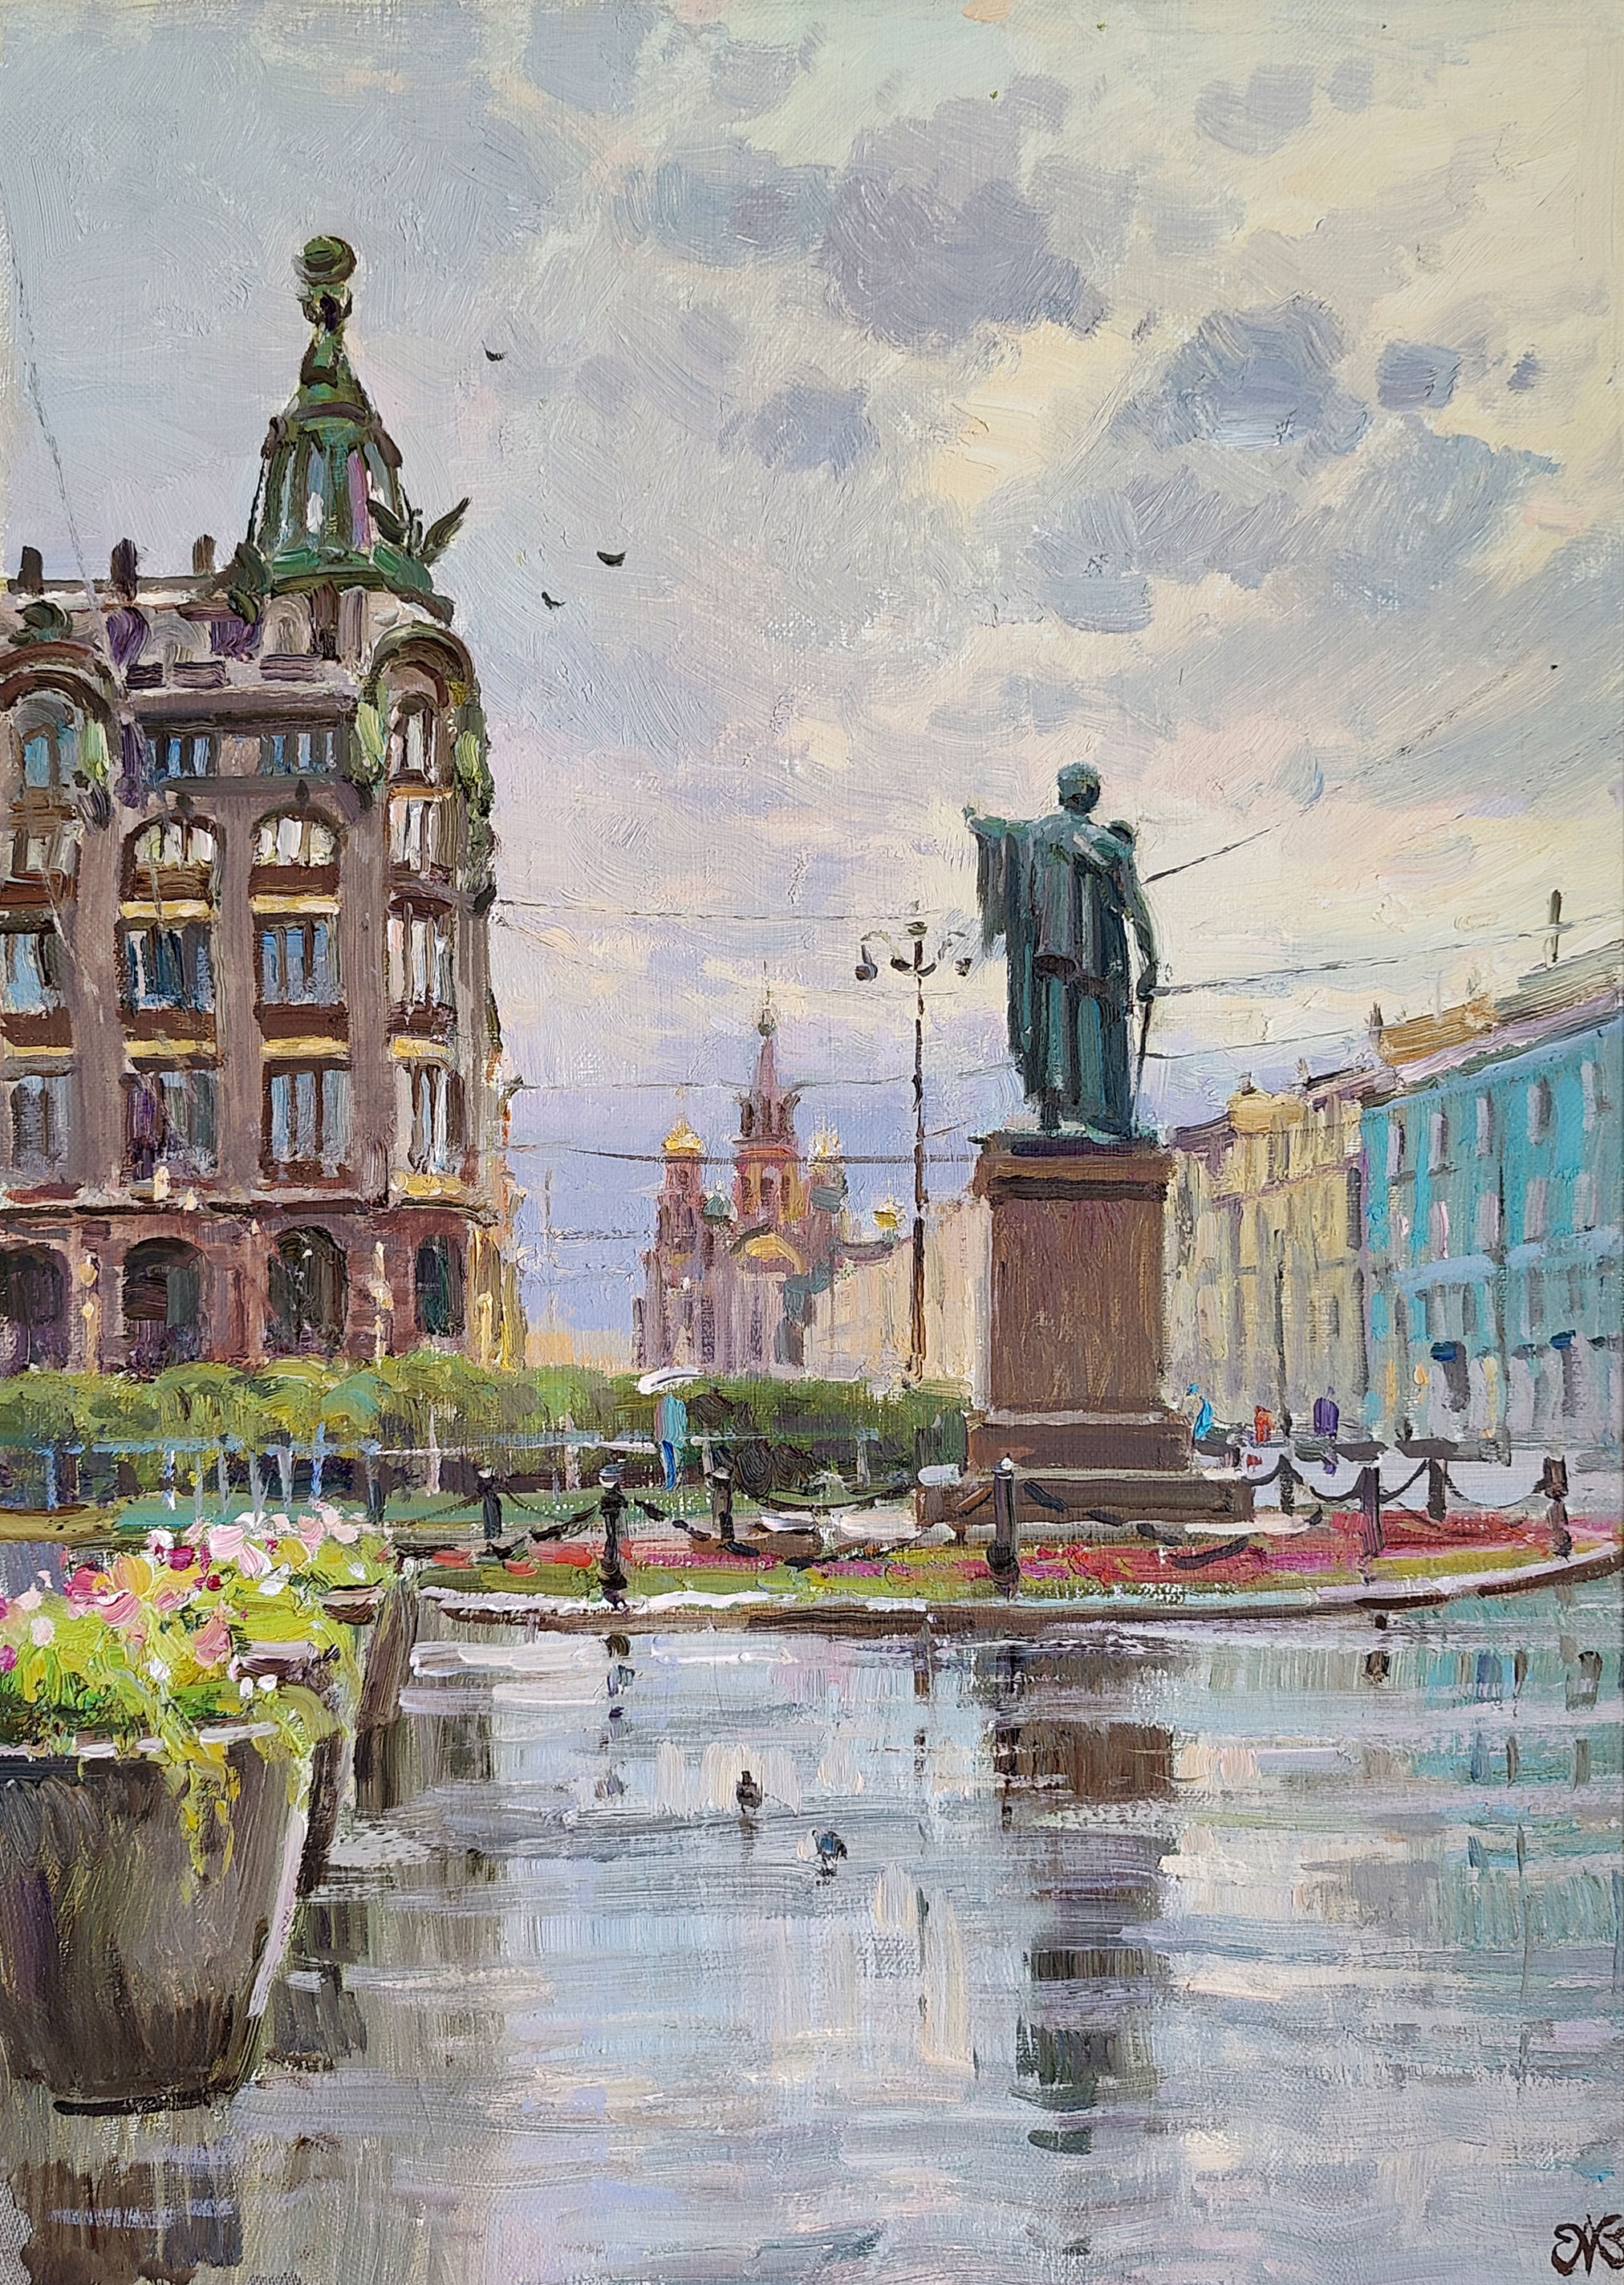 Meeting place - 1, Alexey Efremov, Buy the painting Oil